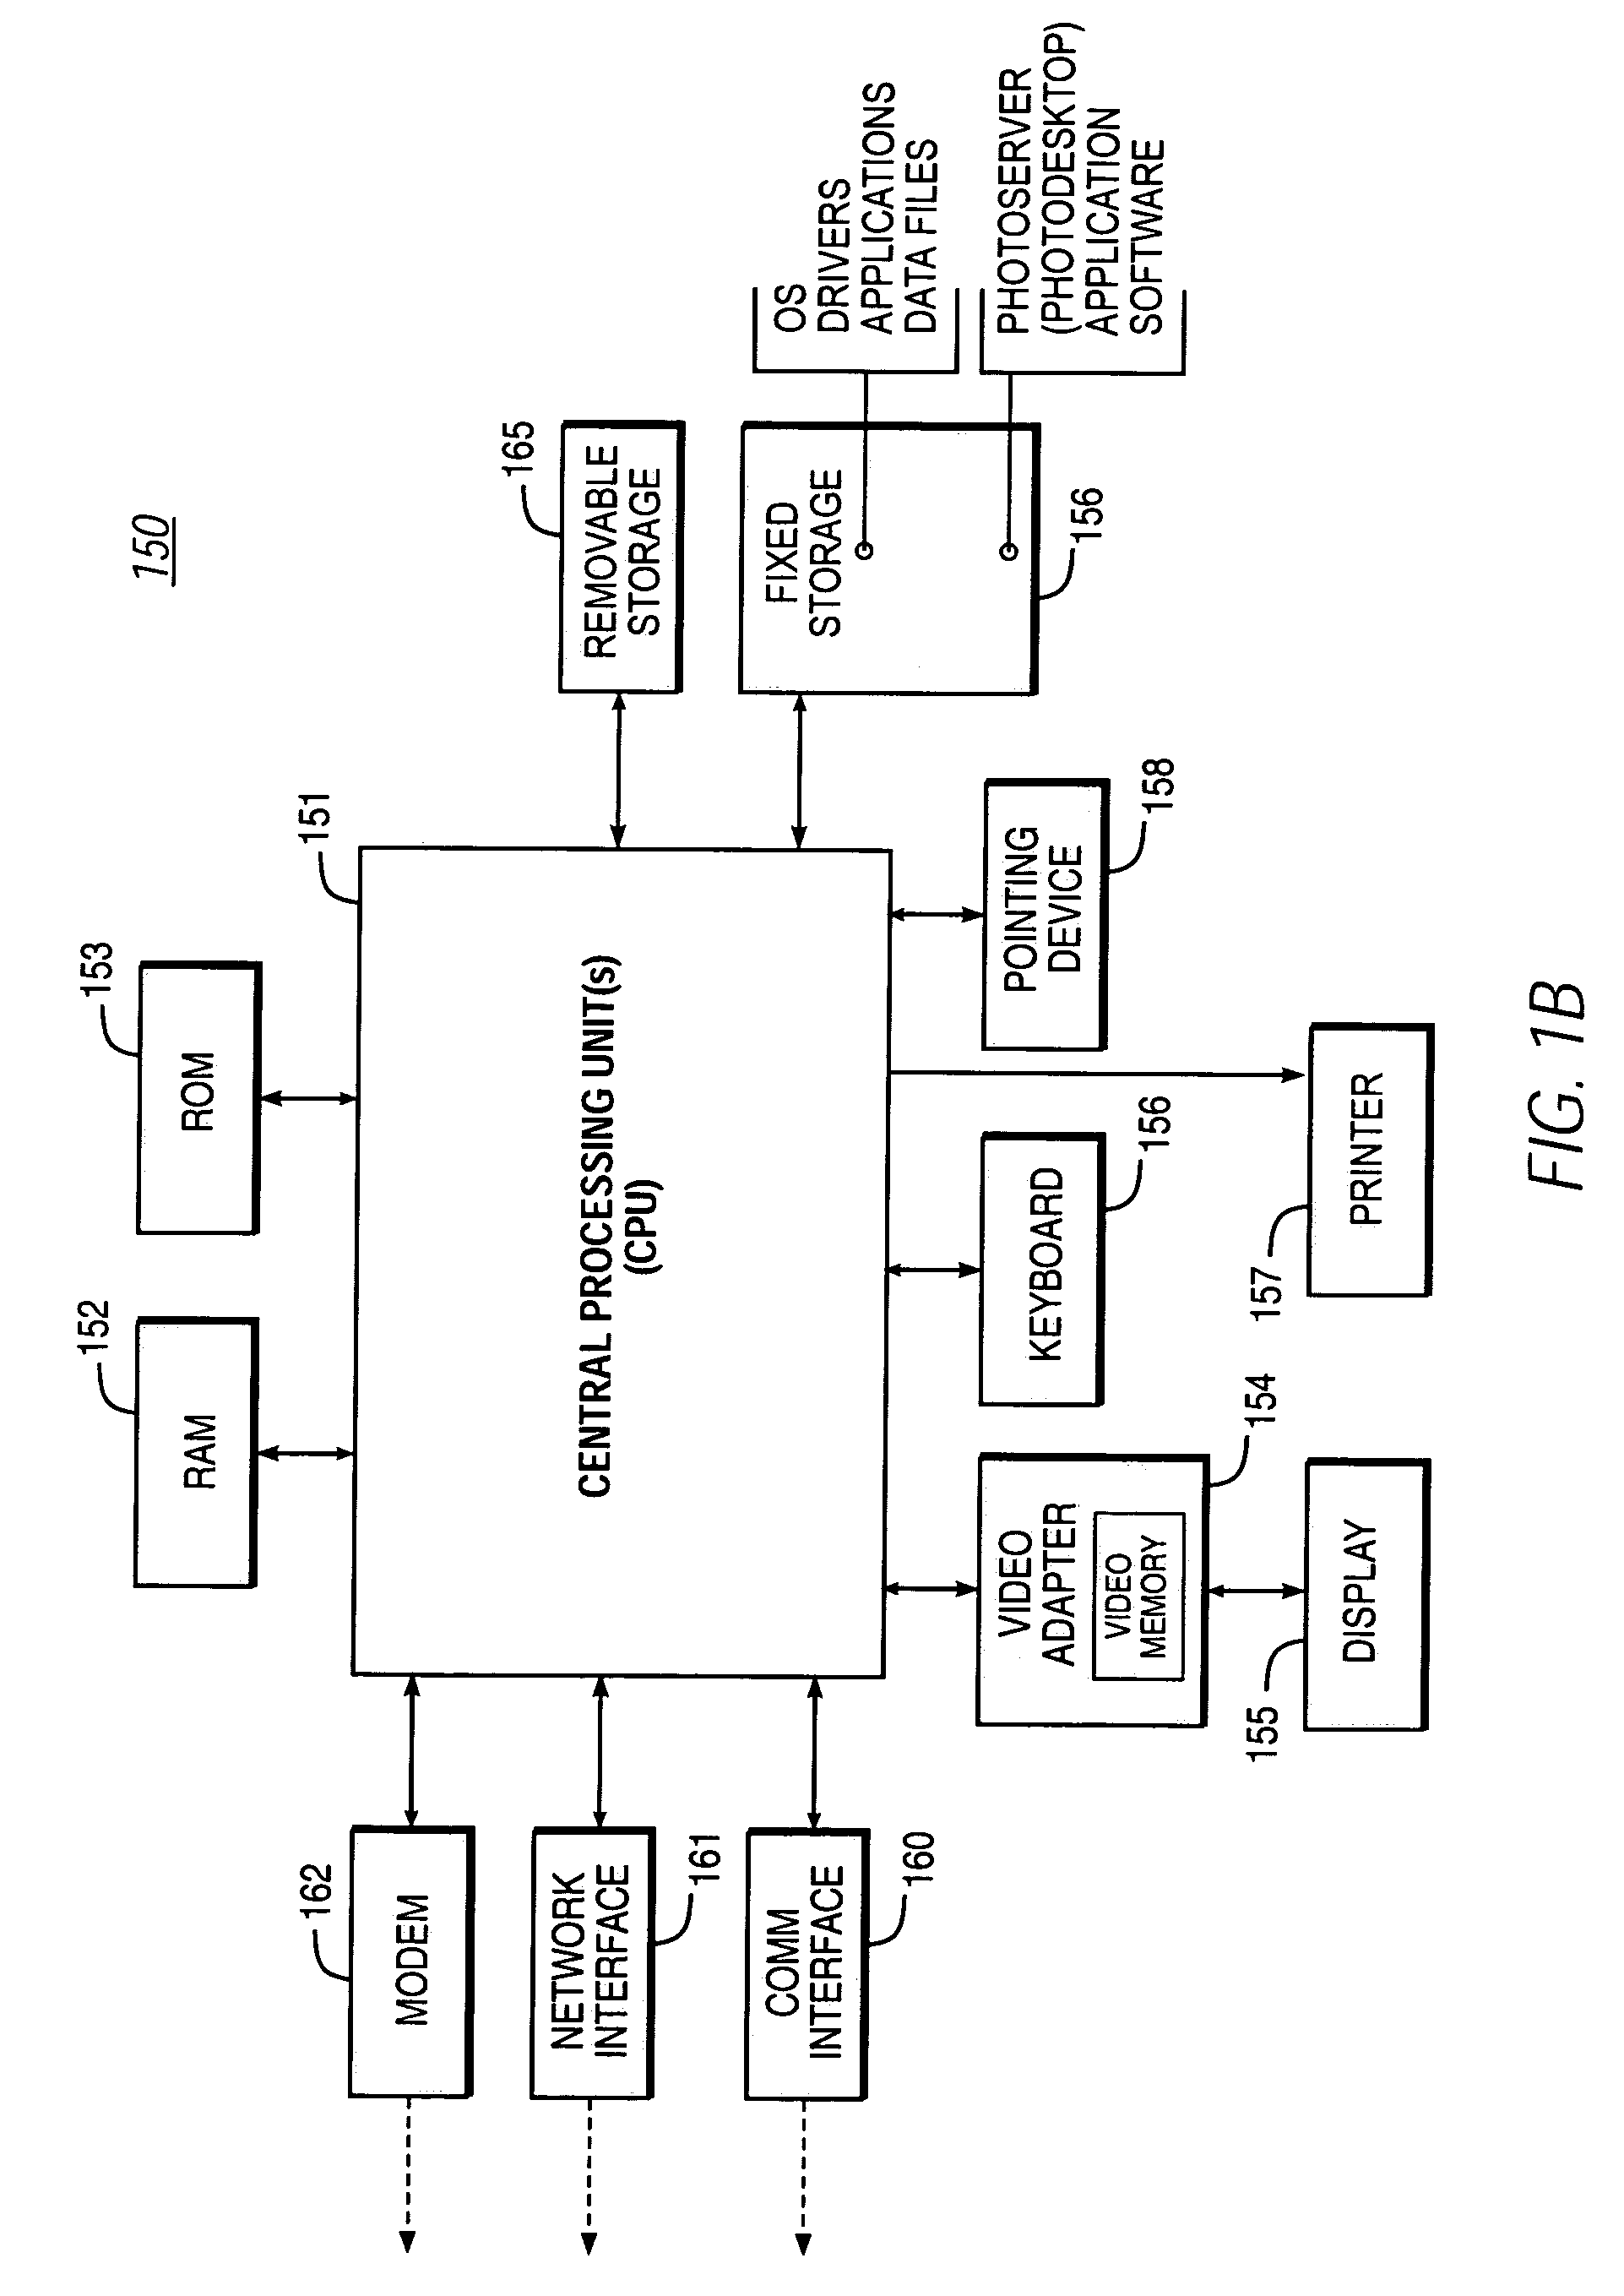 Digital camera device and methodology for distributed processing and wireless transmission of digital images